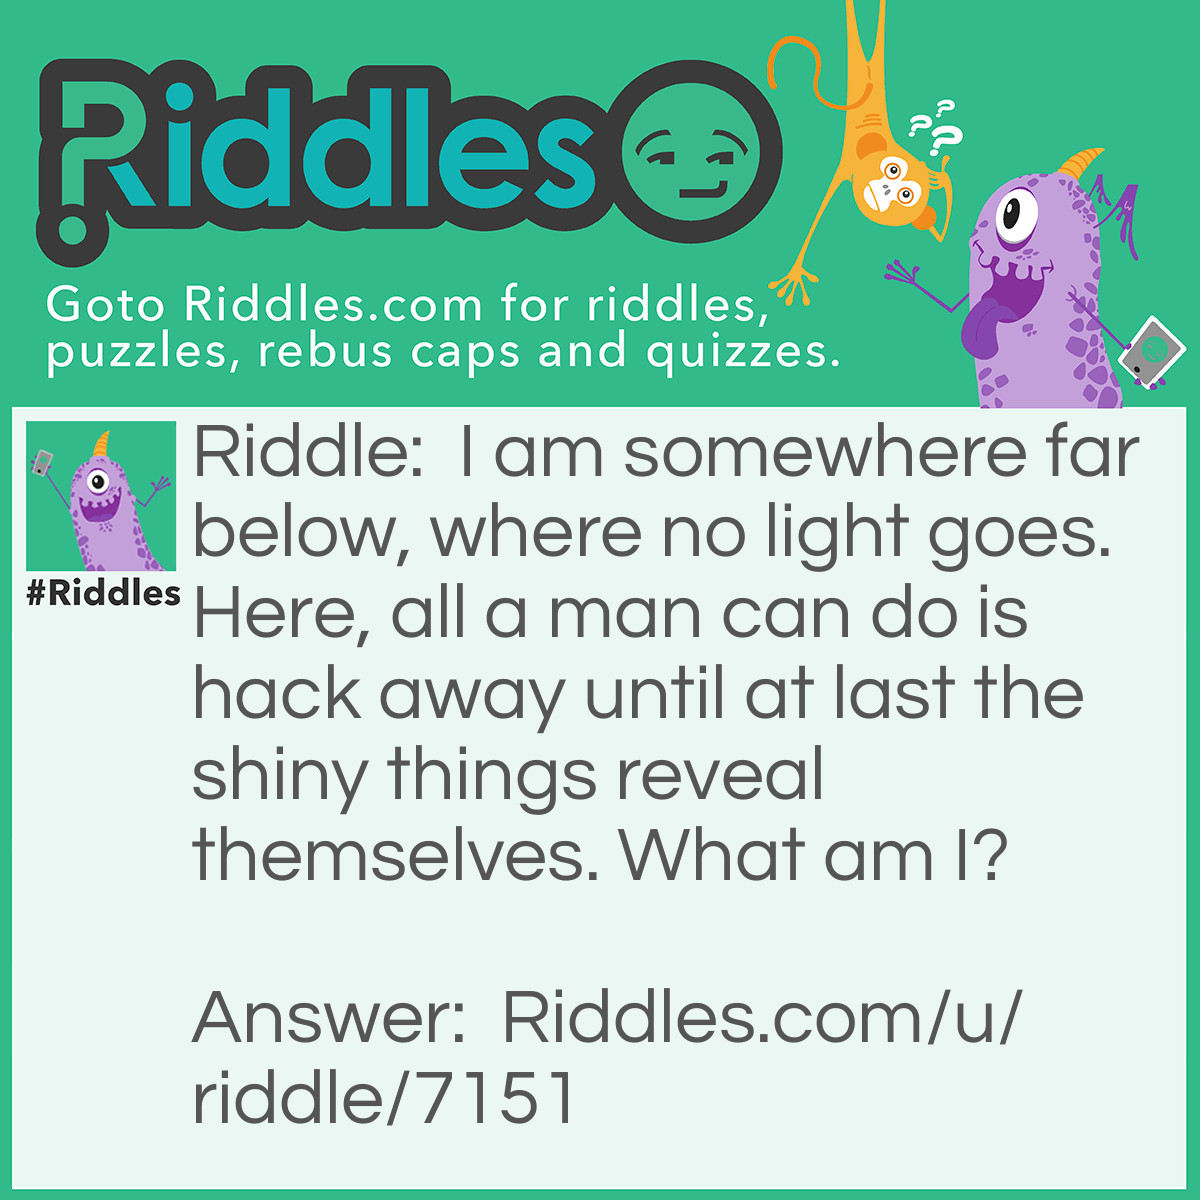 Riddle: I am somewhere far below, where no light goes. Here, all a man can do is hack away until at last the shiny things reveal themselves. What am I? Answer: A (gold) mine.